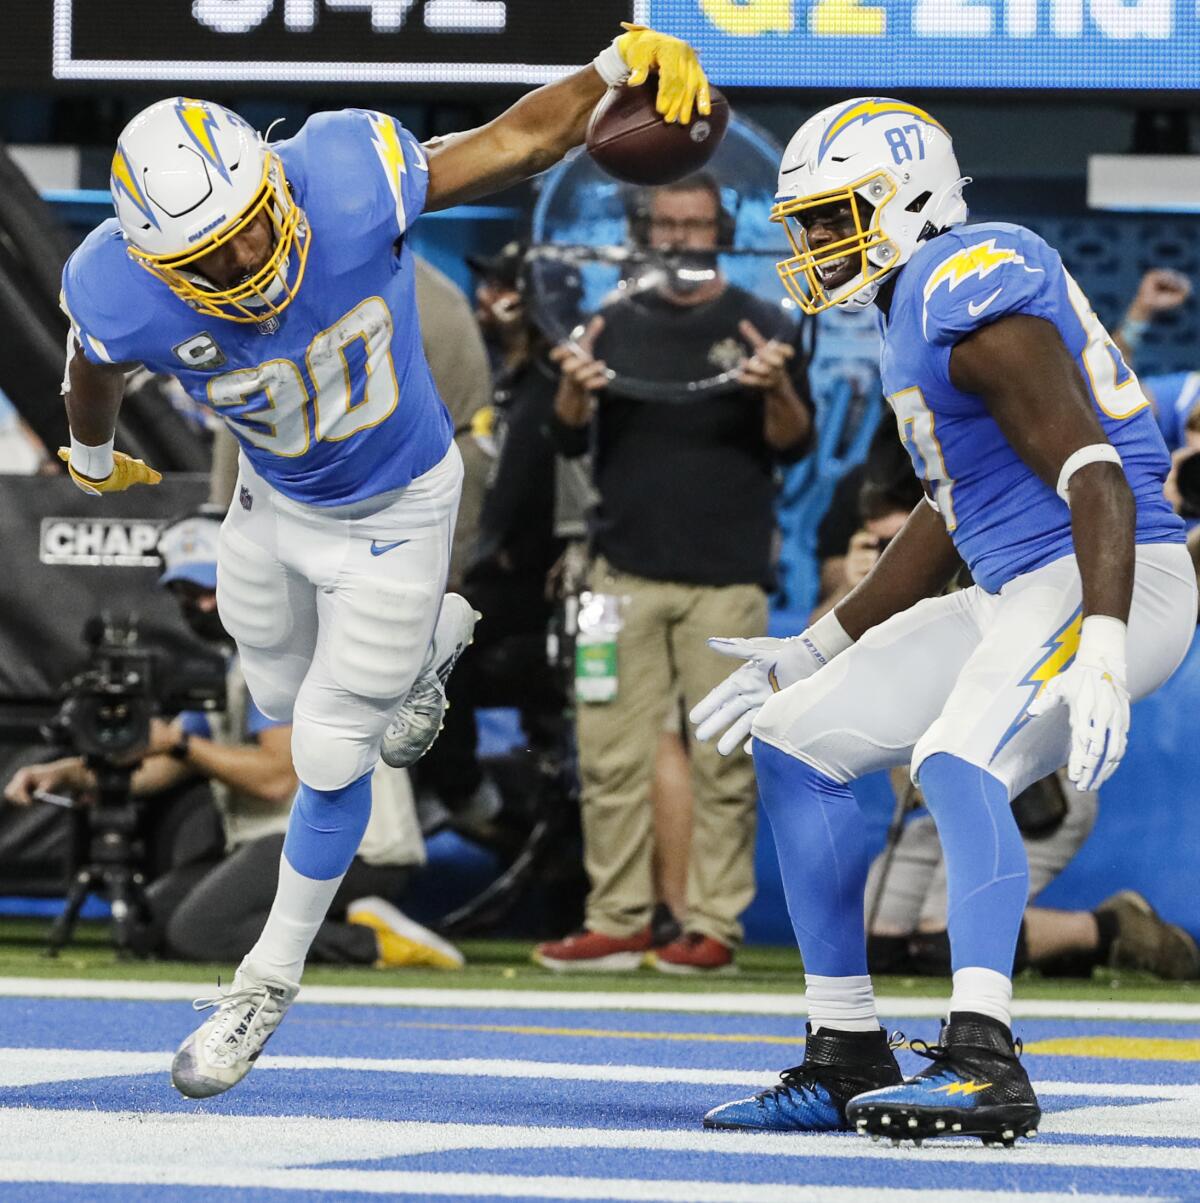  Chargers running back Austin Ekeler (30) scores a touchdown as teammate Jared Cook watches.